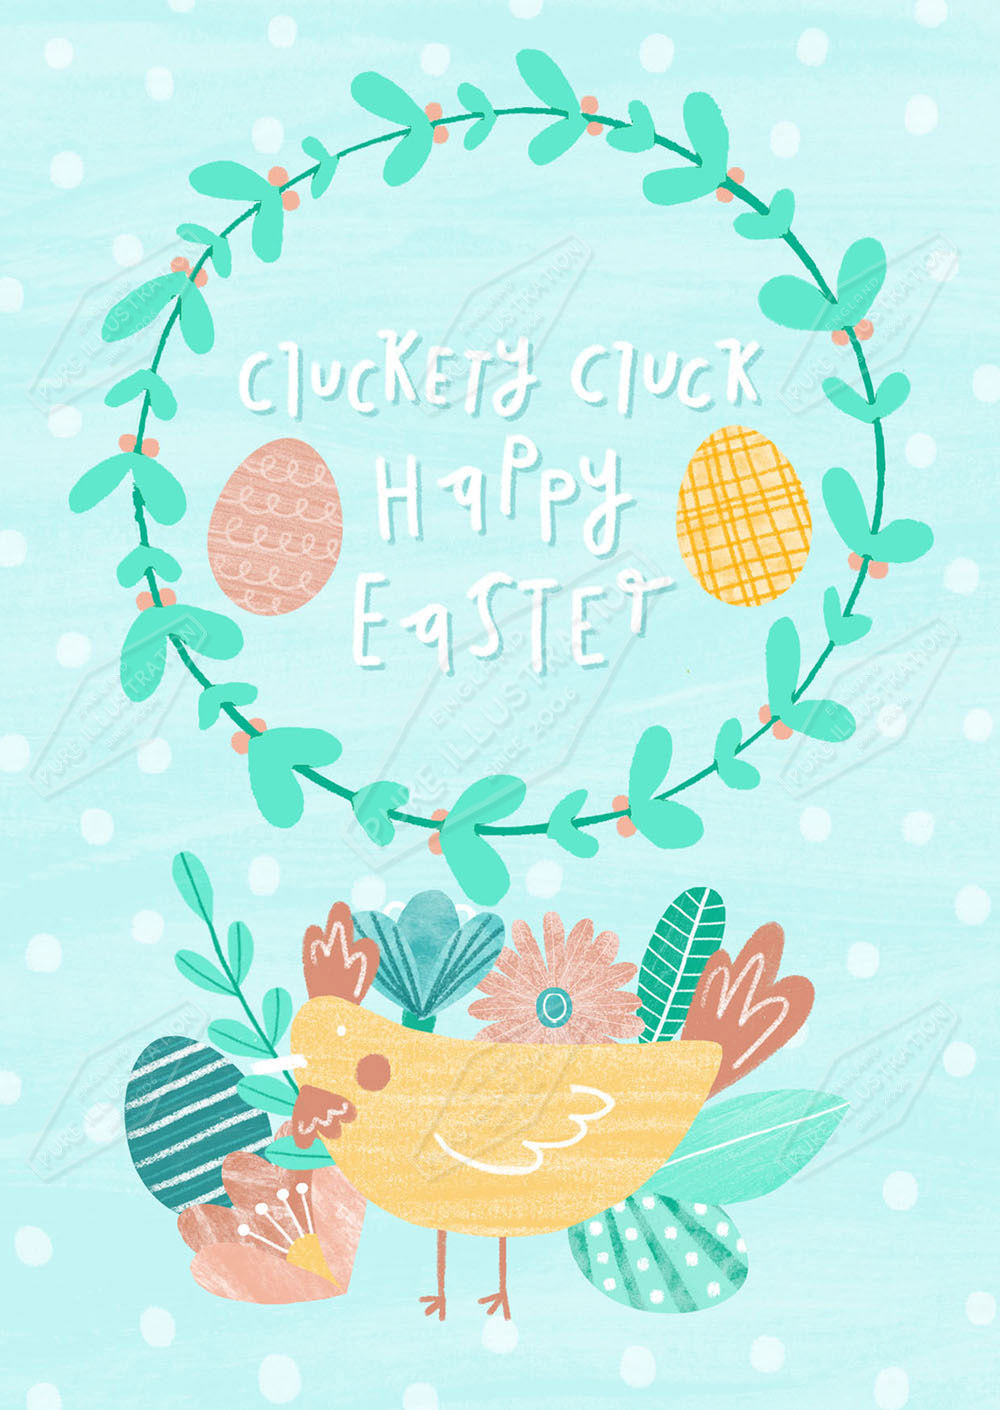 Easter Chick Greeting Card Design - by Leah Brideaux - Pure Art Licensing Agency & Surface Design Studio